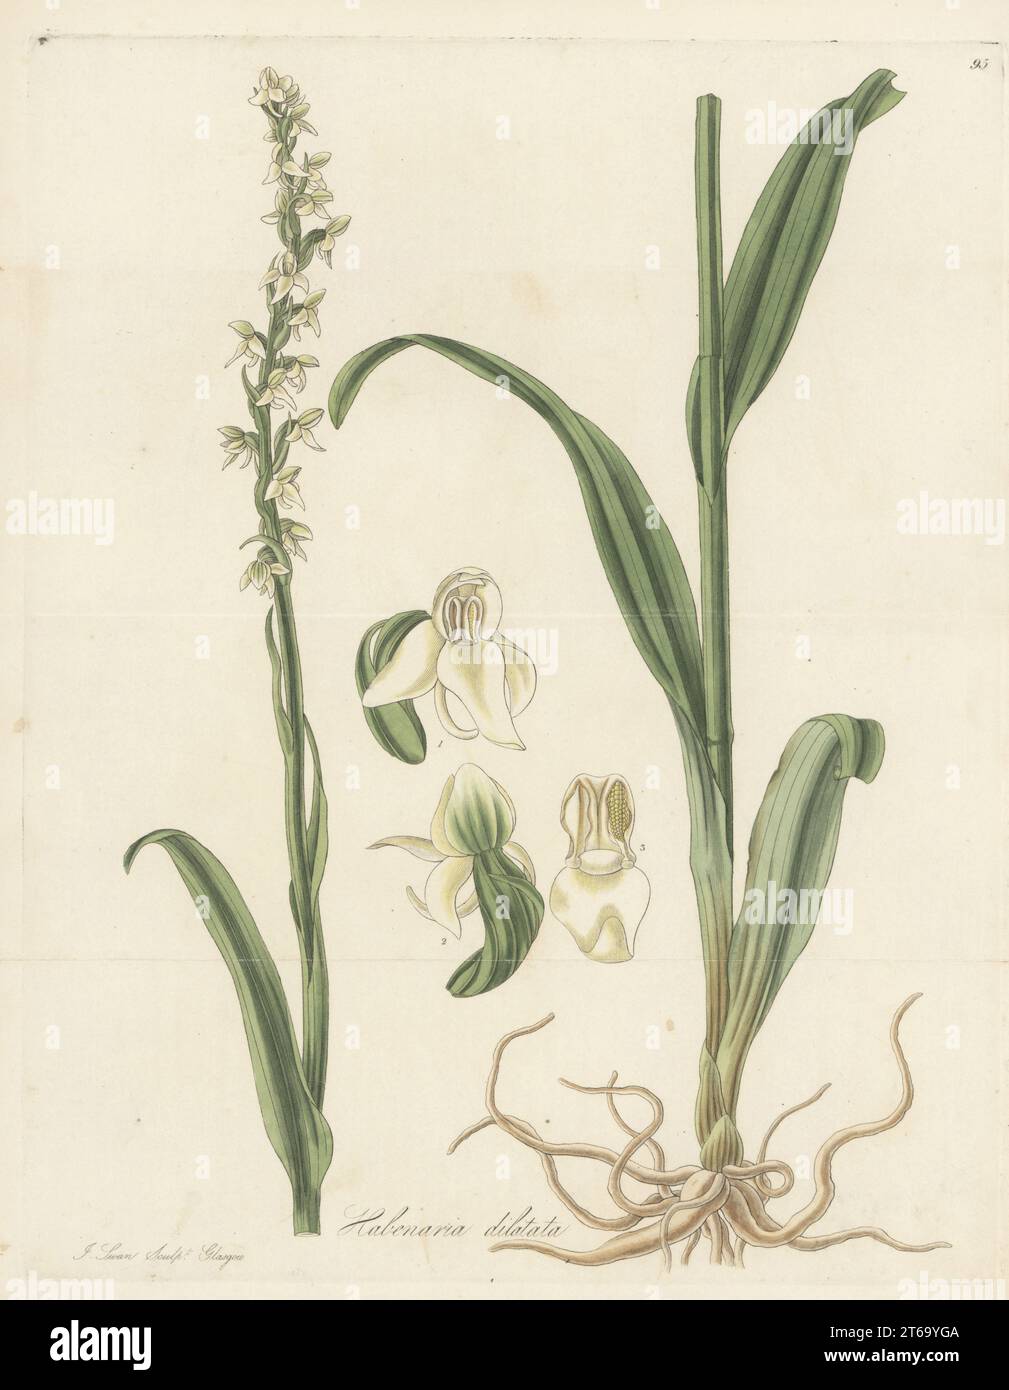 Tall white bog orchid, bog candle, fragrant white bog orchid or scentbottle, Platanthera dilatata. Native of Canada, introduced by Scottish botanist John Goldie in 1823, raised at Monkwood Grove, Ayr. Tall greenflowered habenaria, Habernaria dilatata. Handcoloured copperplate engraving by Joseph Swan after a botanical illustration by William Jackson Hooker from his Exotic Flora, William Blackwood, Edinburgh, 1823-27. Stock Photo